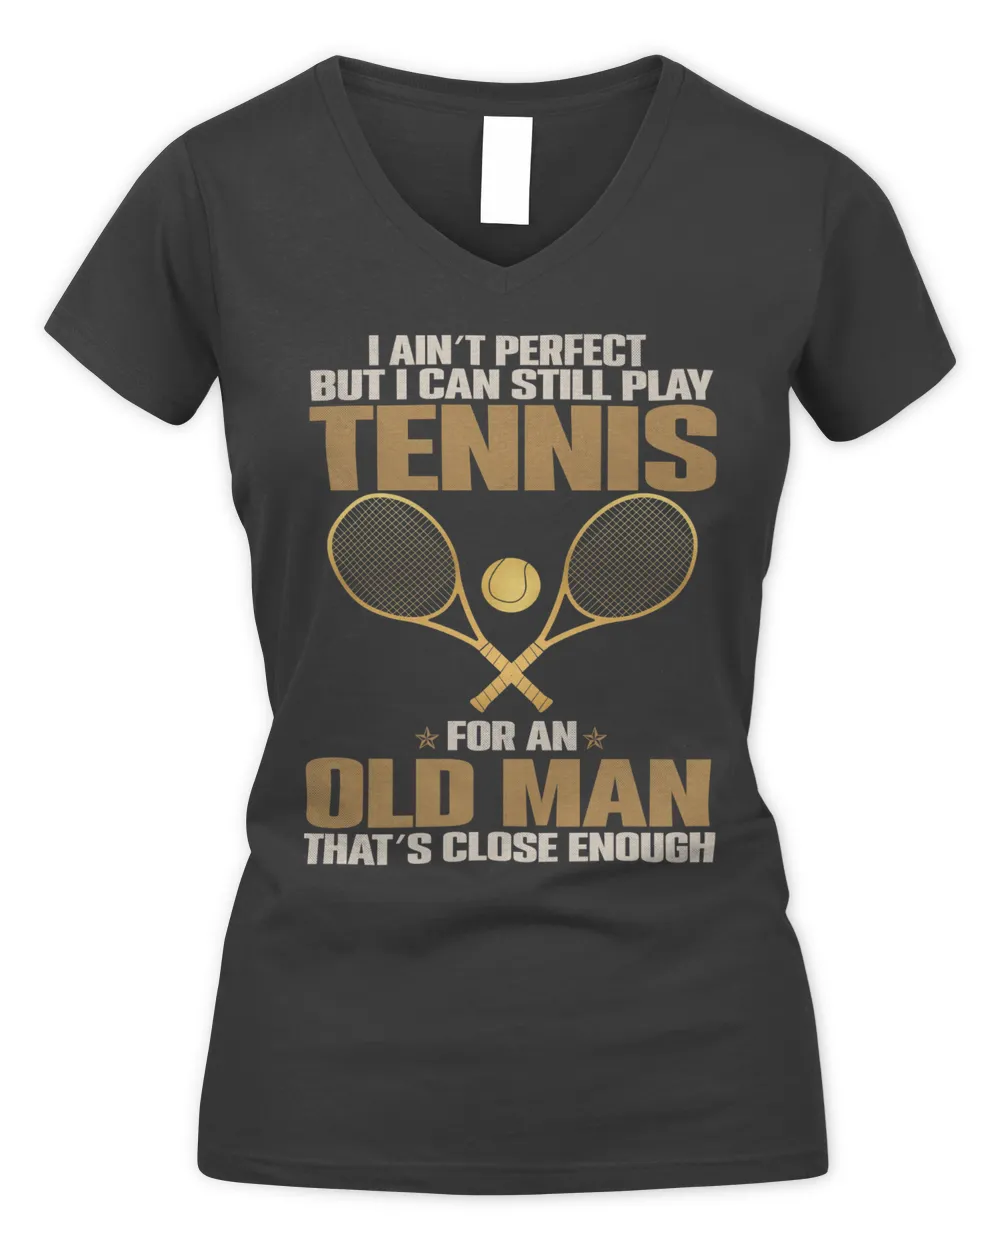 But I can still play tennis for an old man